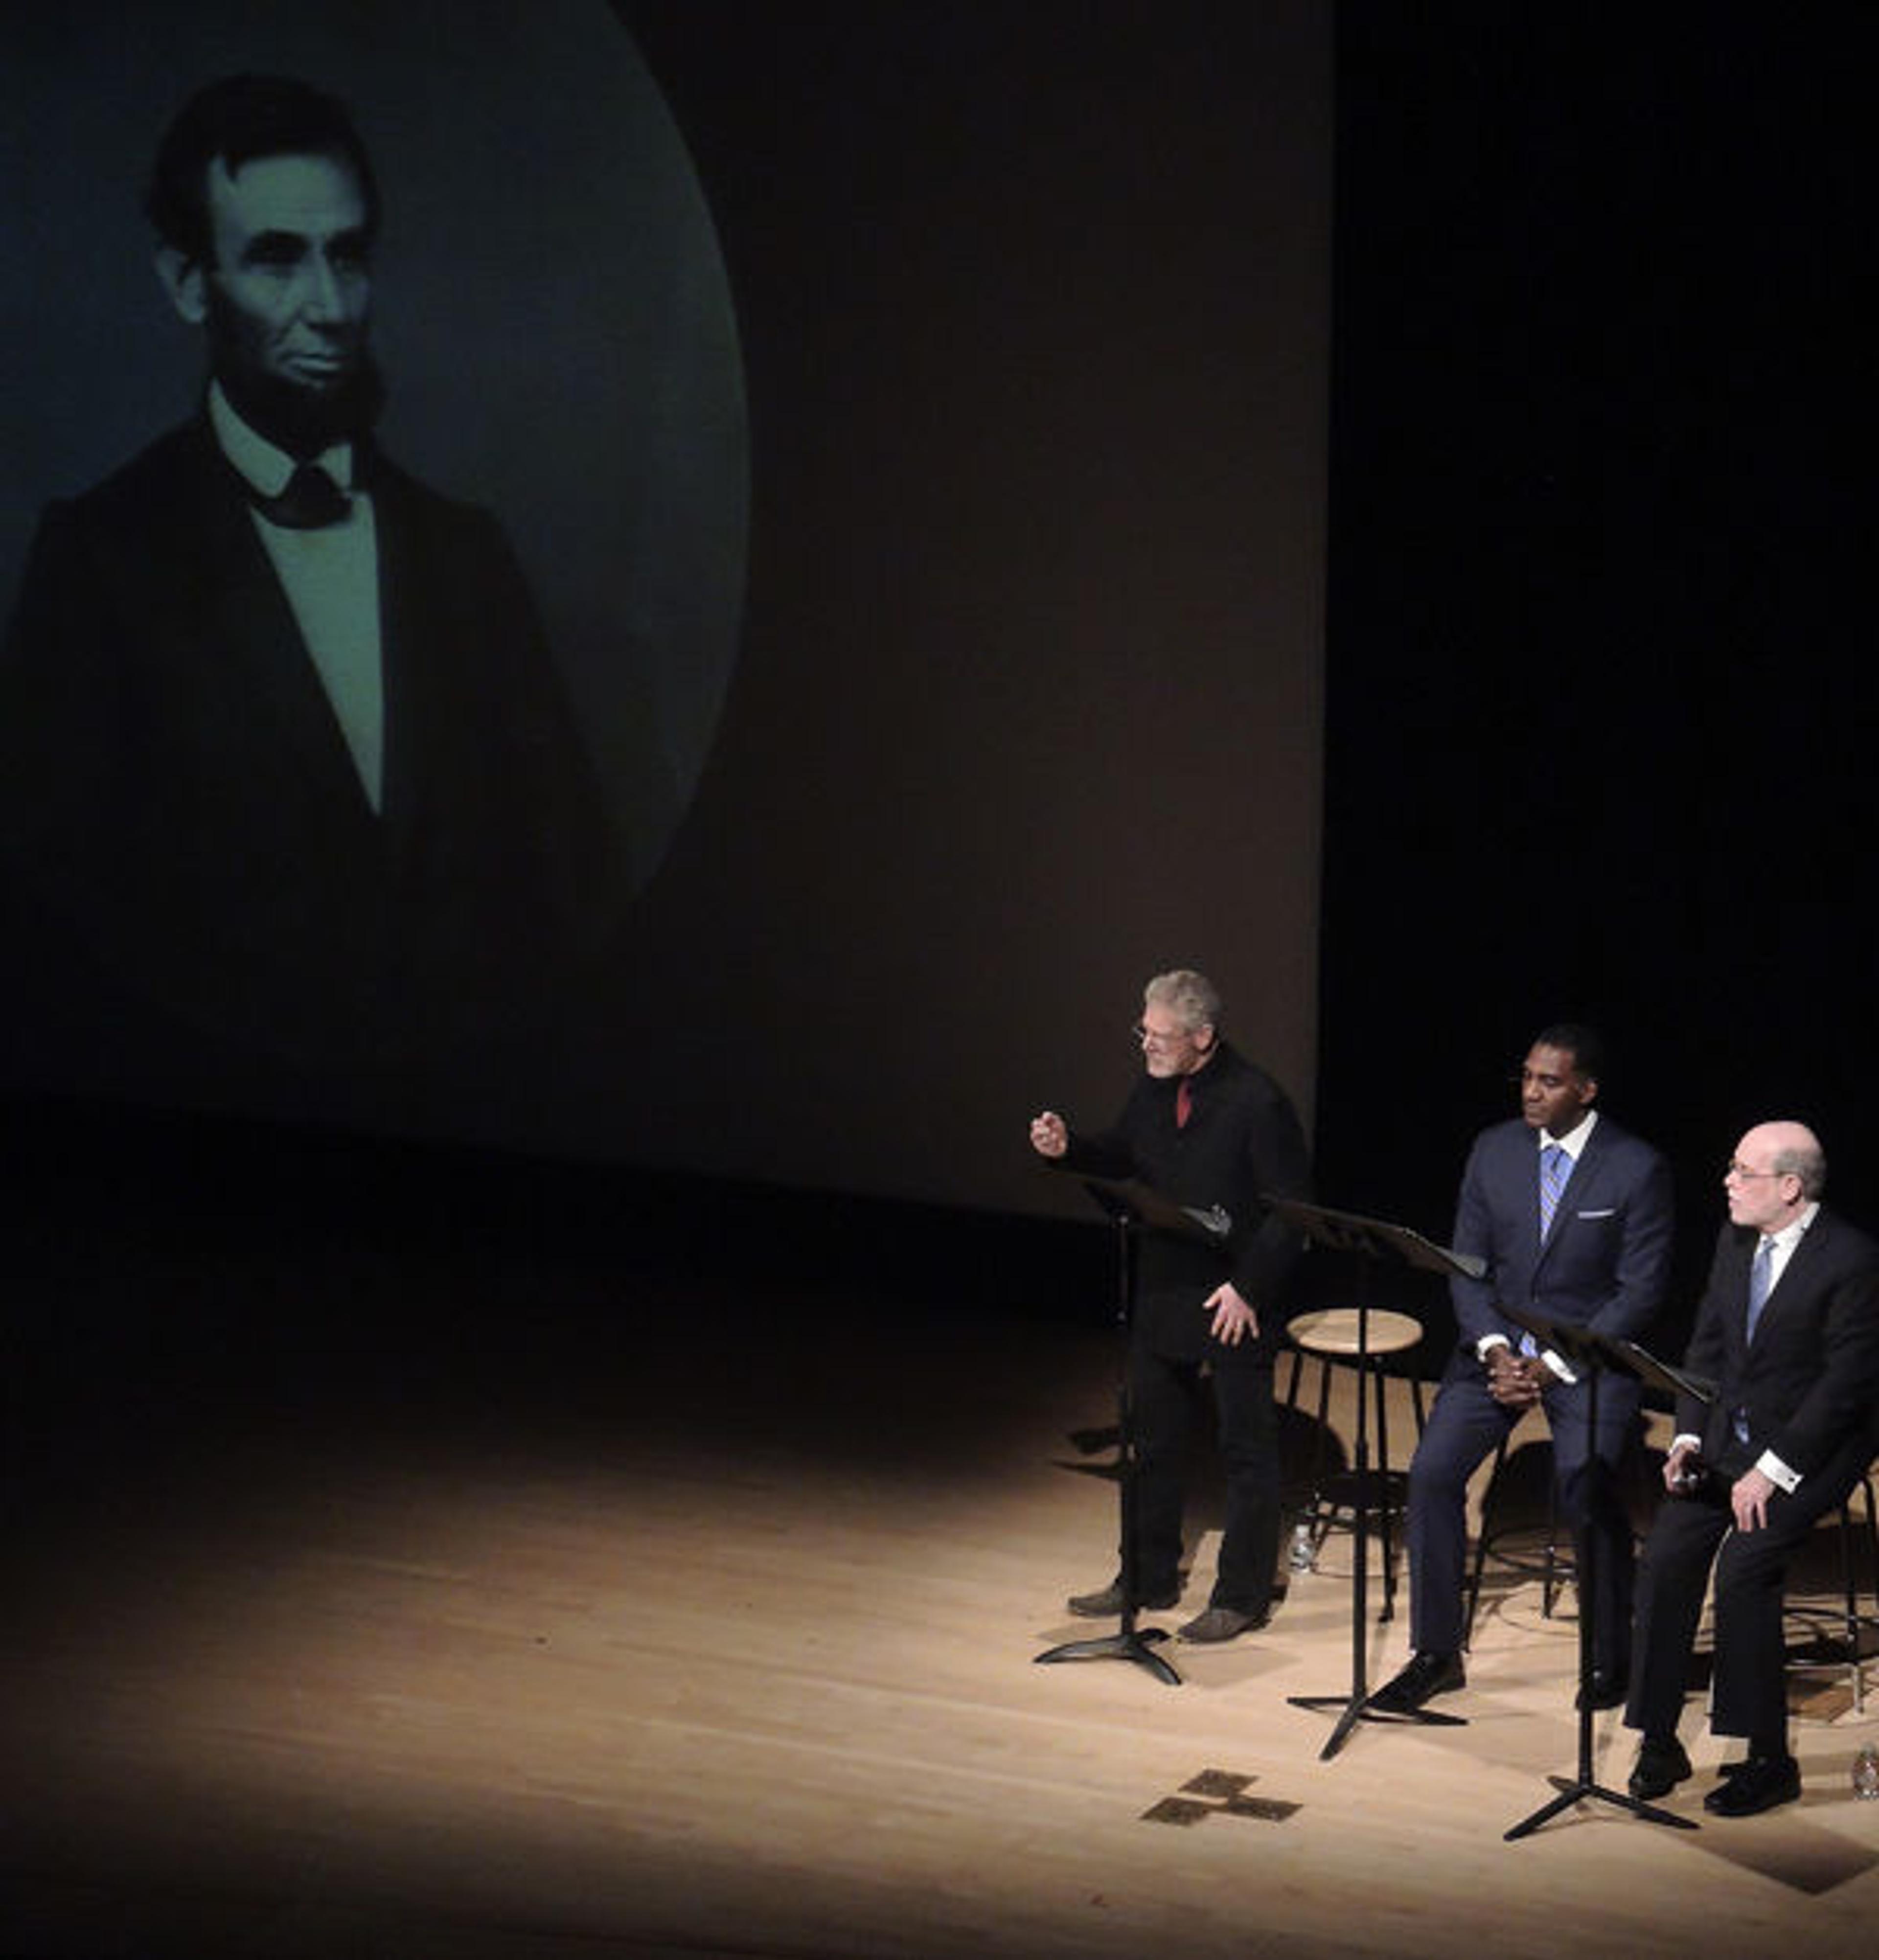 The Unknown "Lincoln-Douglass" Debate, held February 18, 2014, in the Grace Rainey Rogers Auditorium